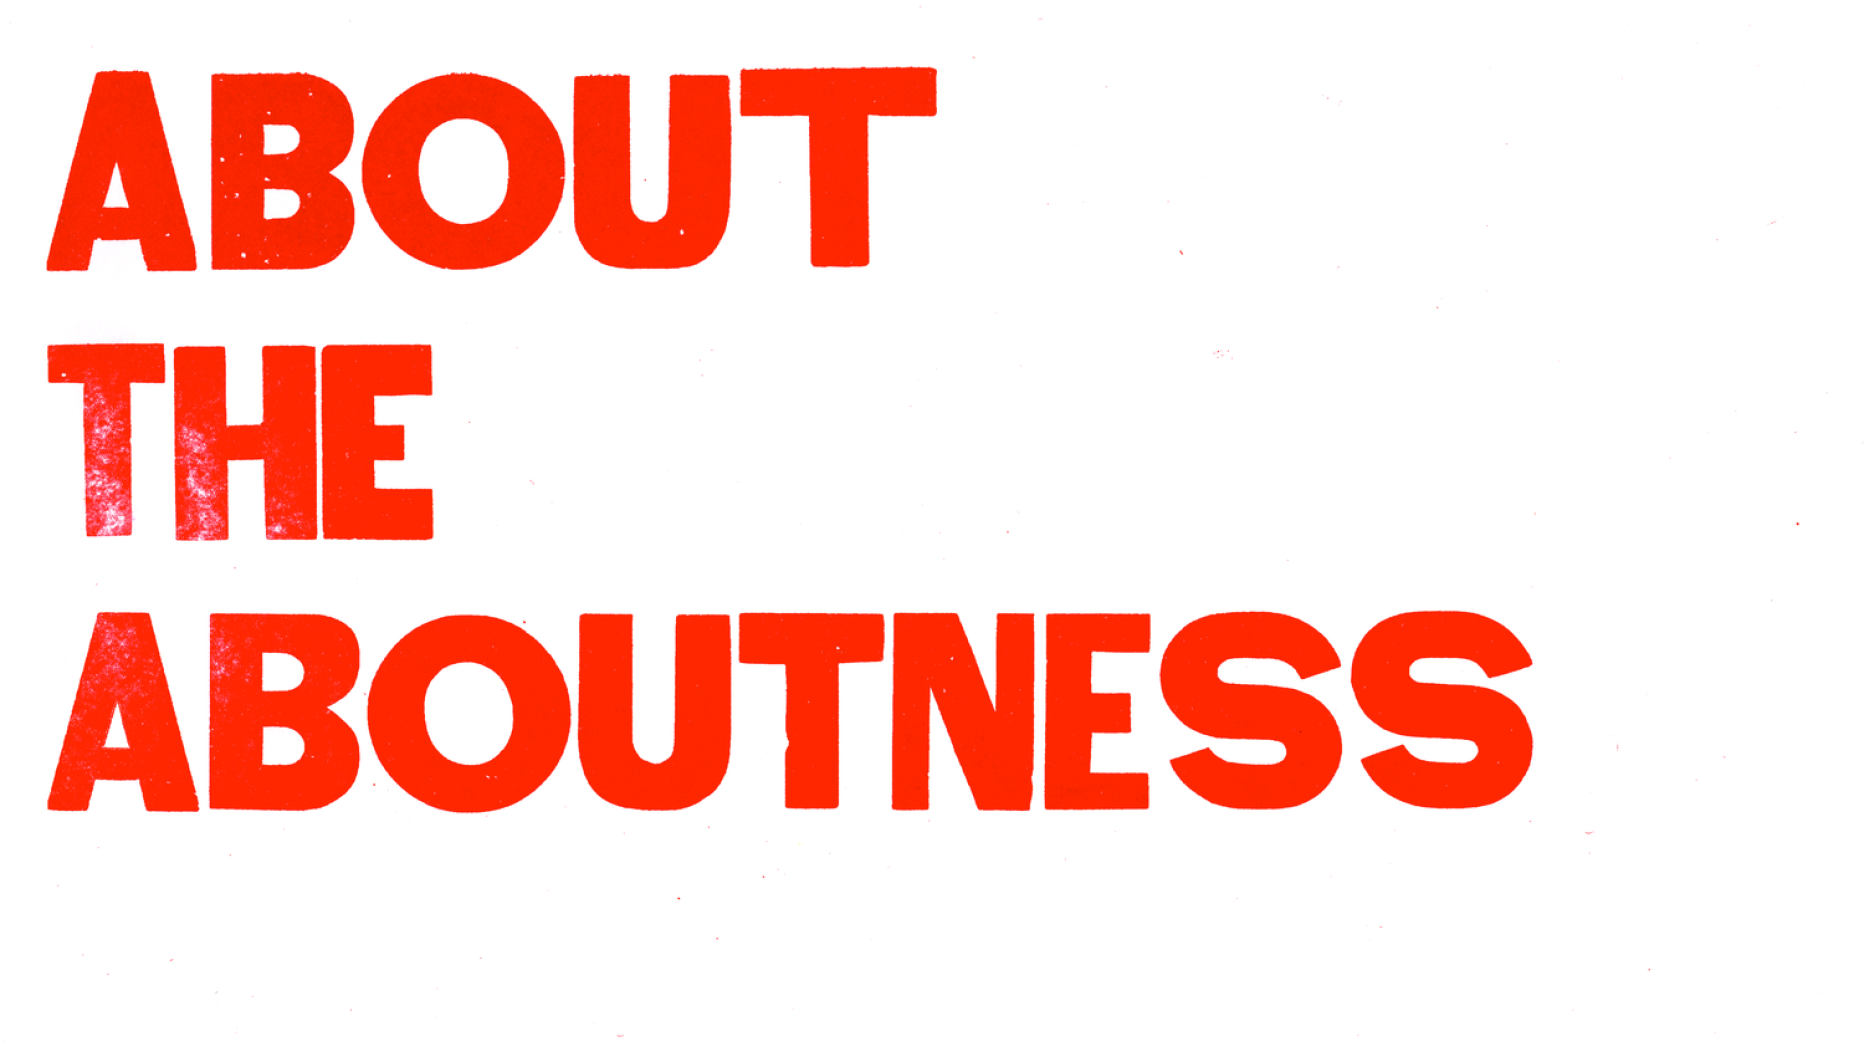 Text "About the Aboutness" in a bold energetic red font.